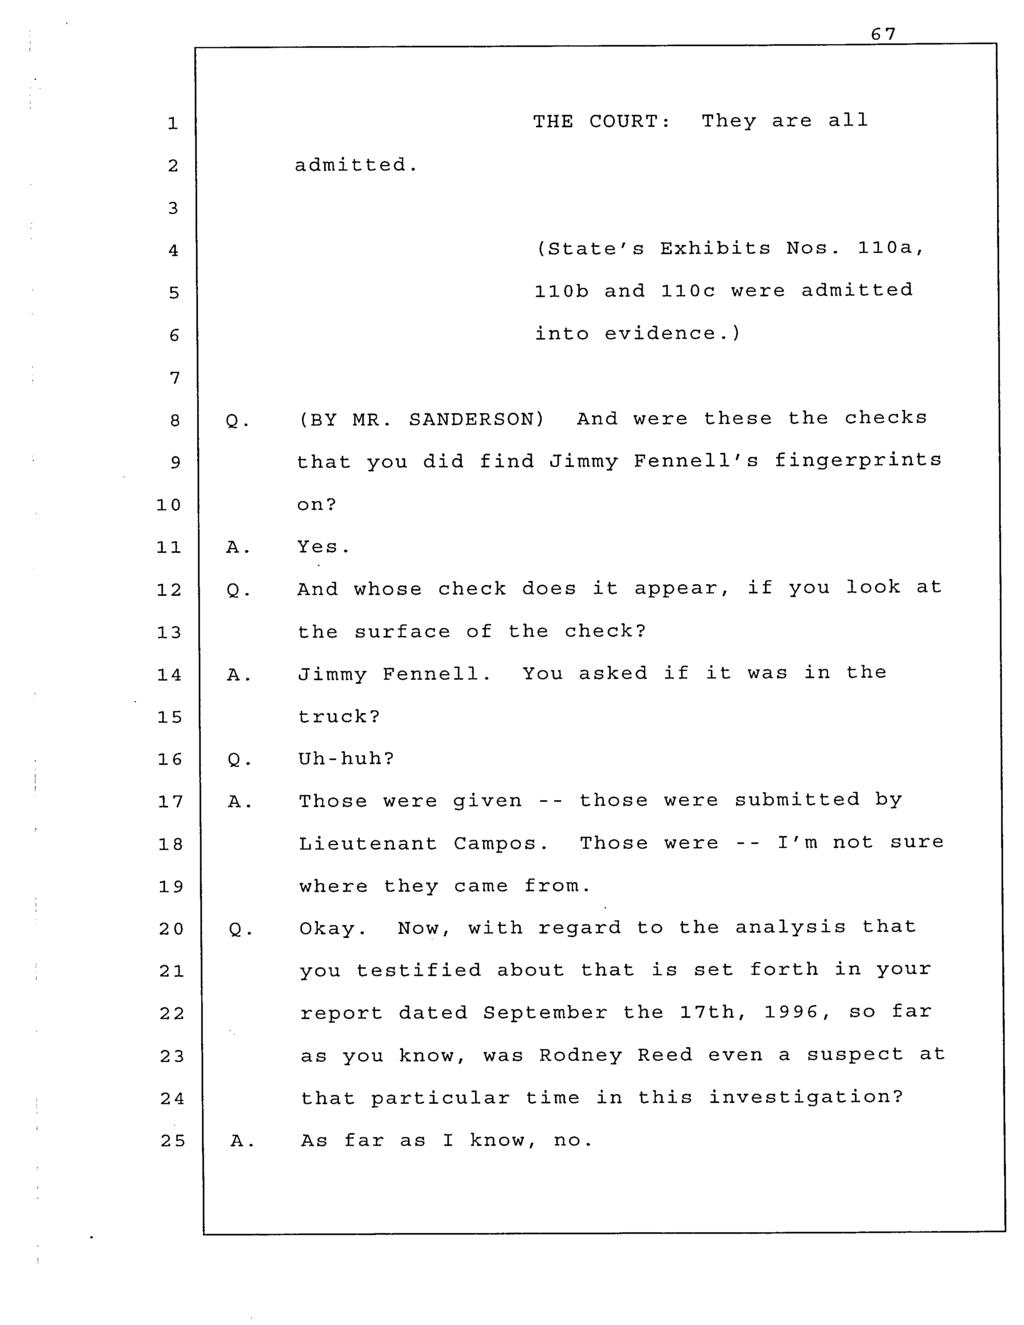 THE COURT: They are all admitted. (State's Exhibits Nos. 0a, 0b and 0c were admitted into evidence.) (BY MR. SANDERSON) And were these the checks 0 that you did find Jimmy Fennell's fingerprints on?